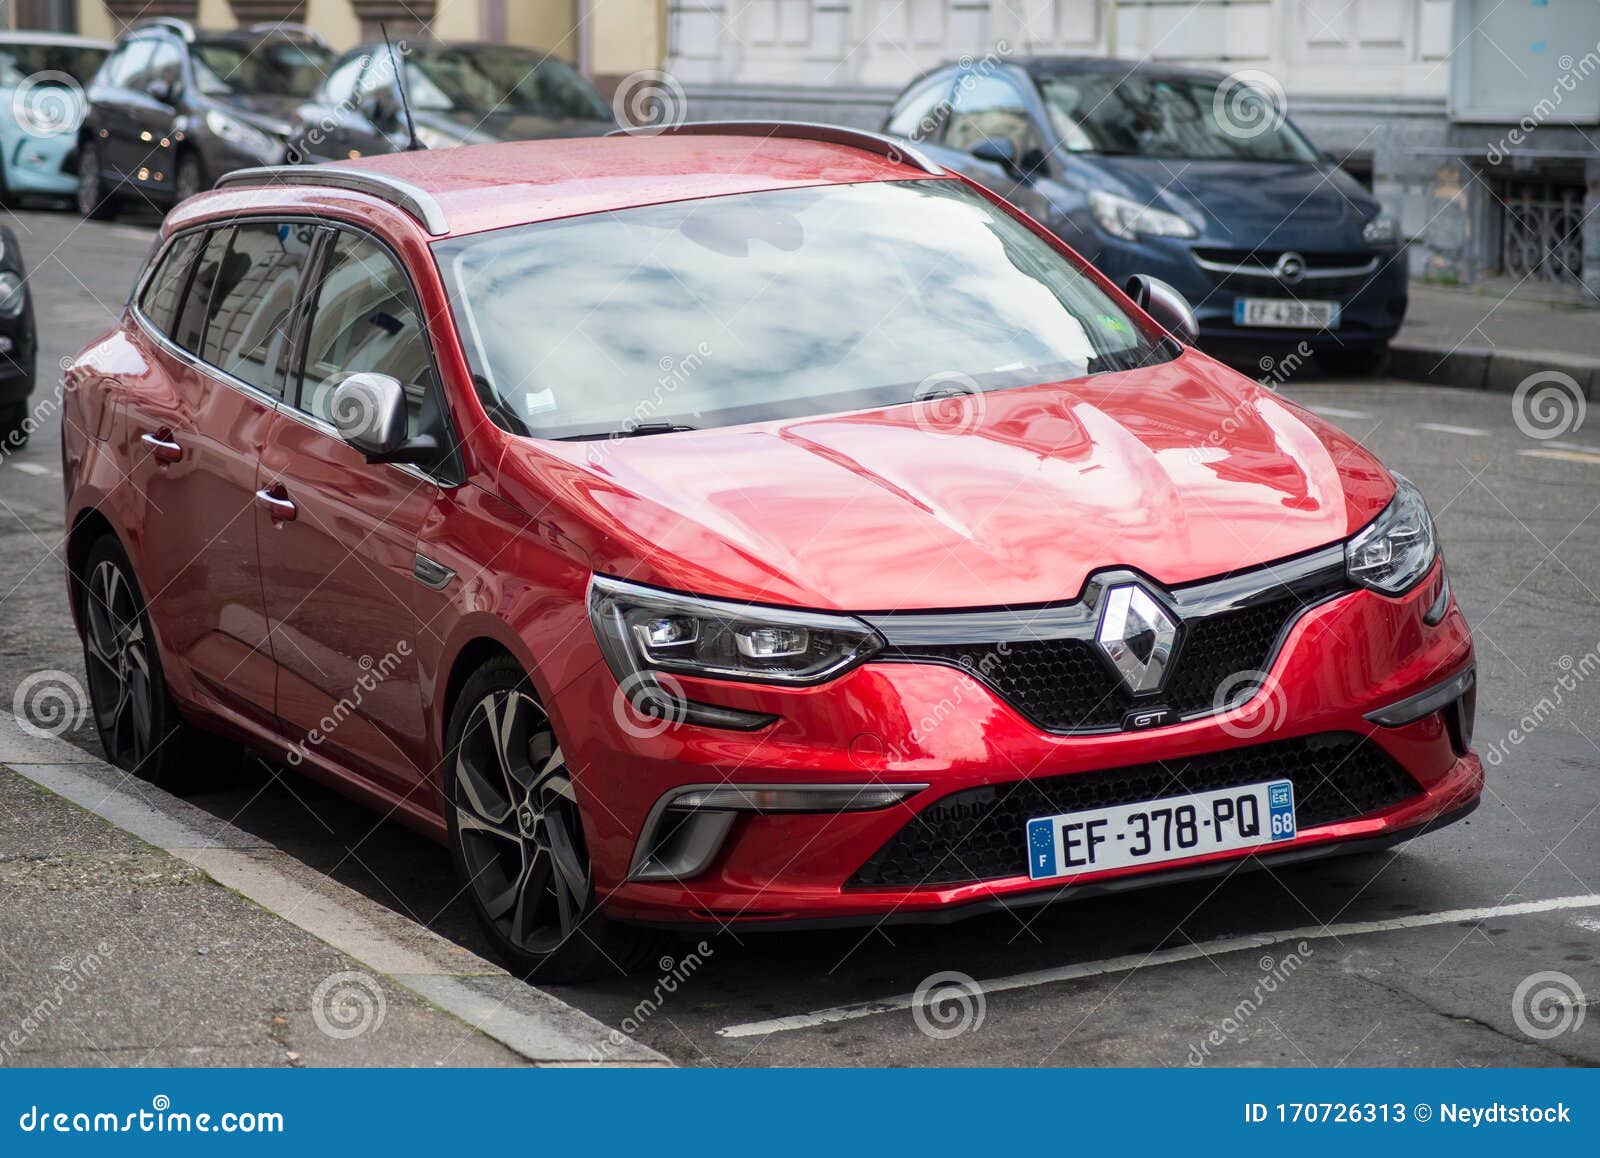 View of Red Renault Megane GT Parked in the Editorial Stock Photo - Image of january, back: 170726313